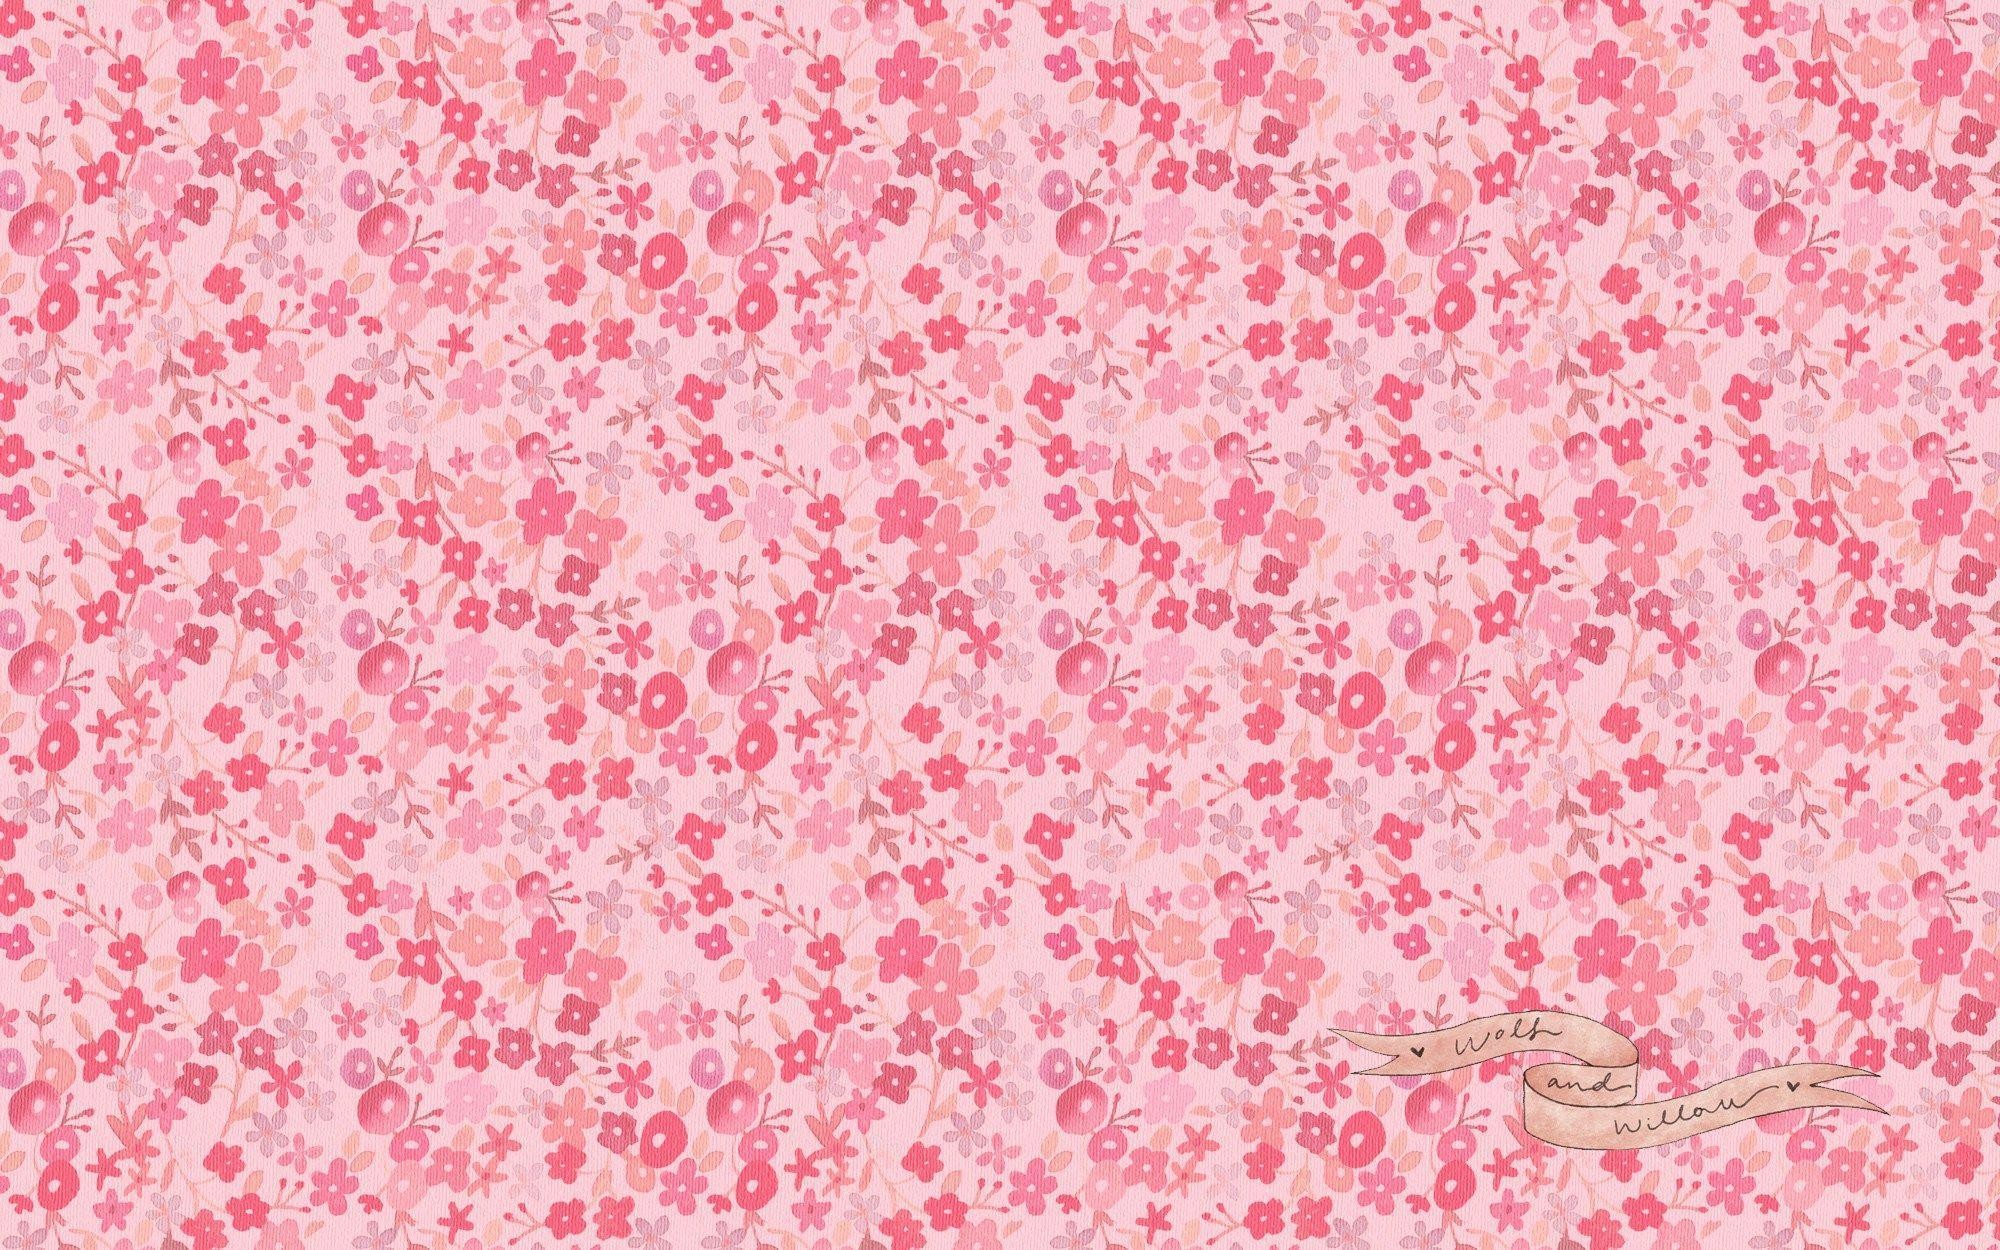 2000x1250 Girly Wallpapers - Wallpaper Cave